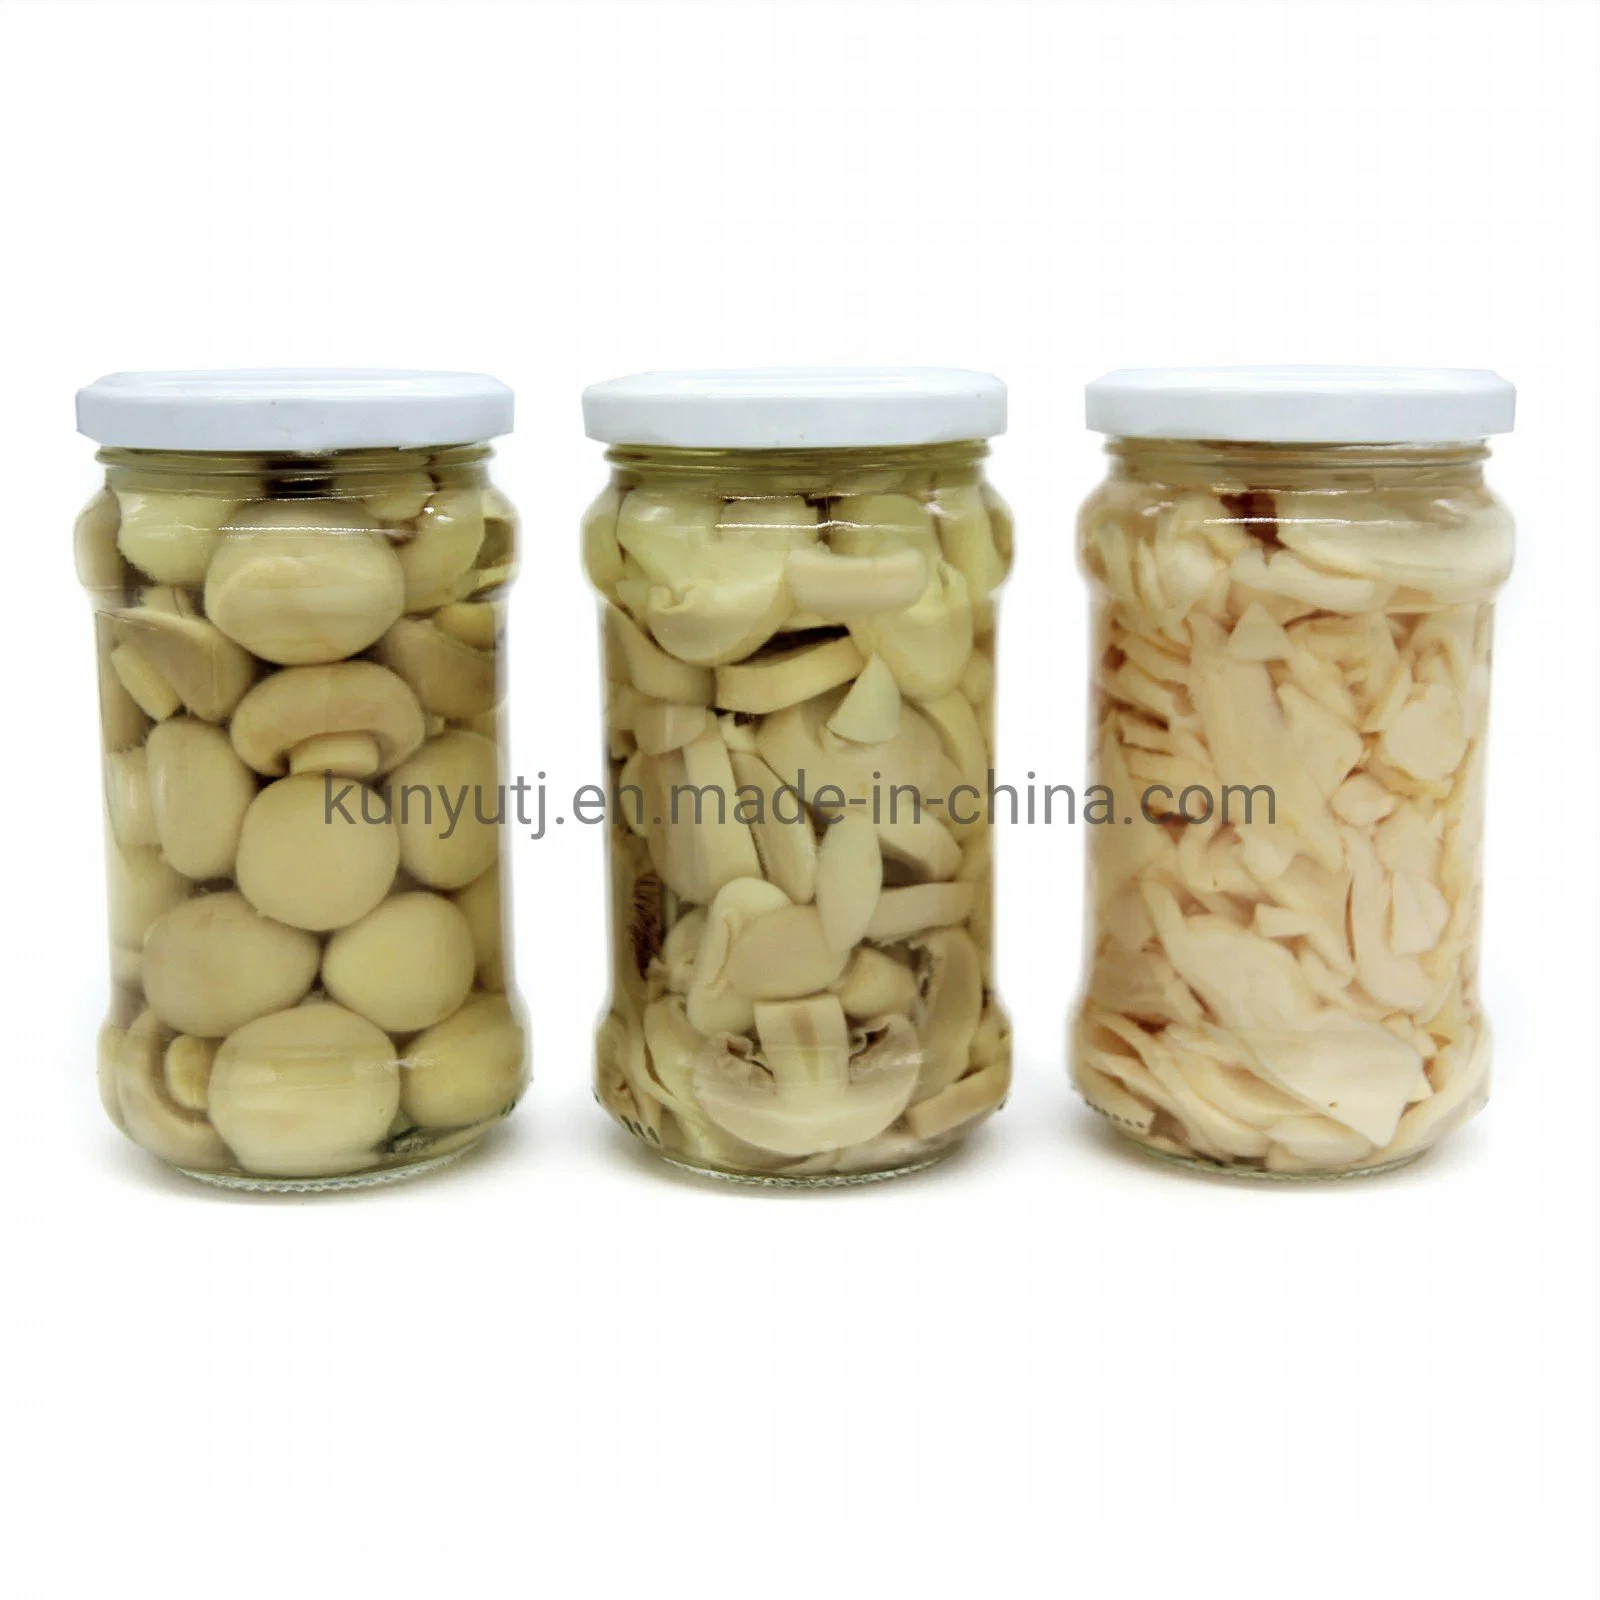 Canned Champignon Mushroom, Button Mushroom Whole 400g with OEM Brand